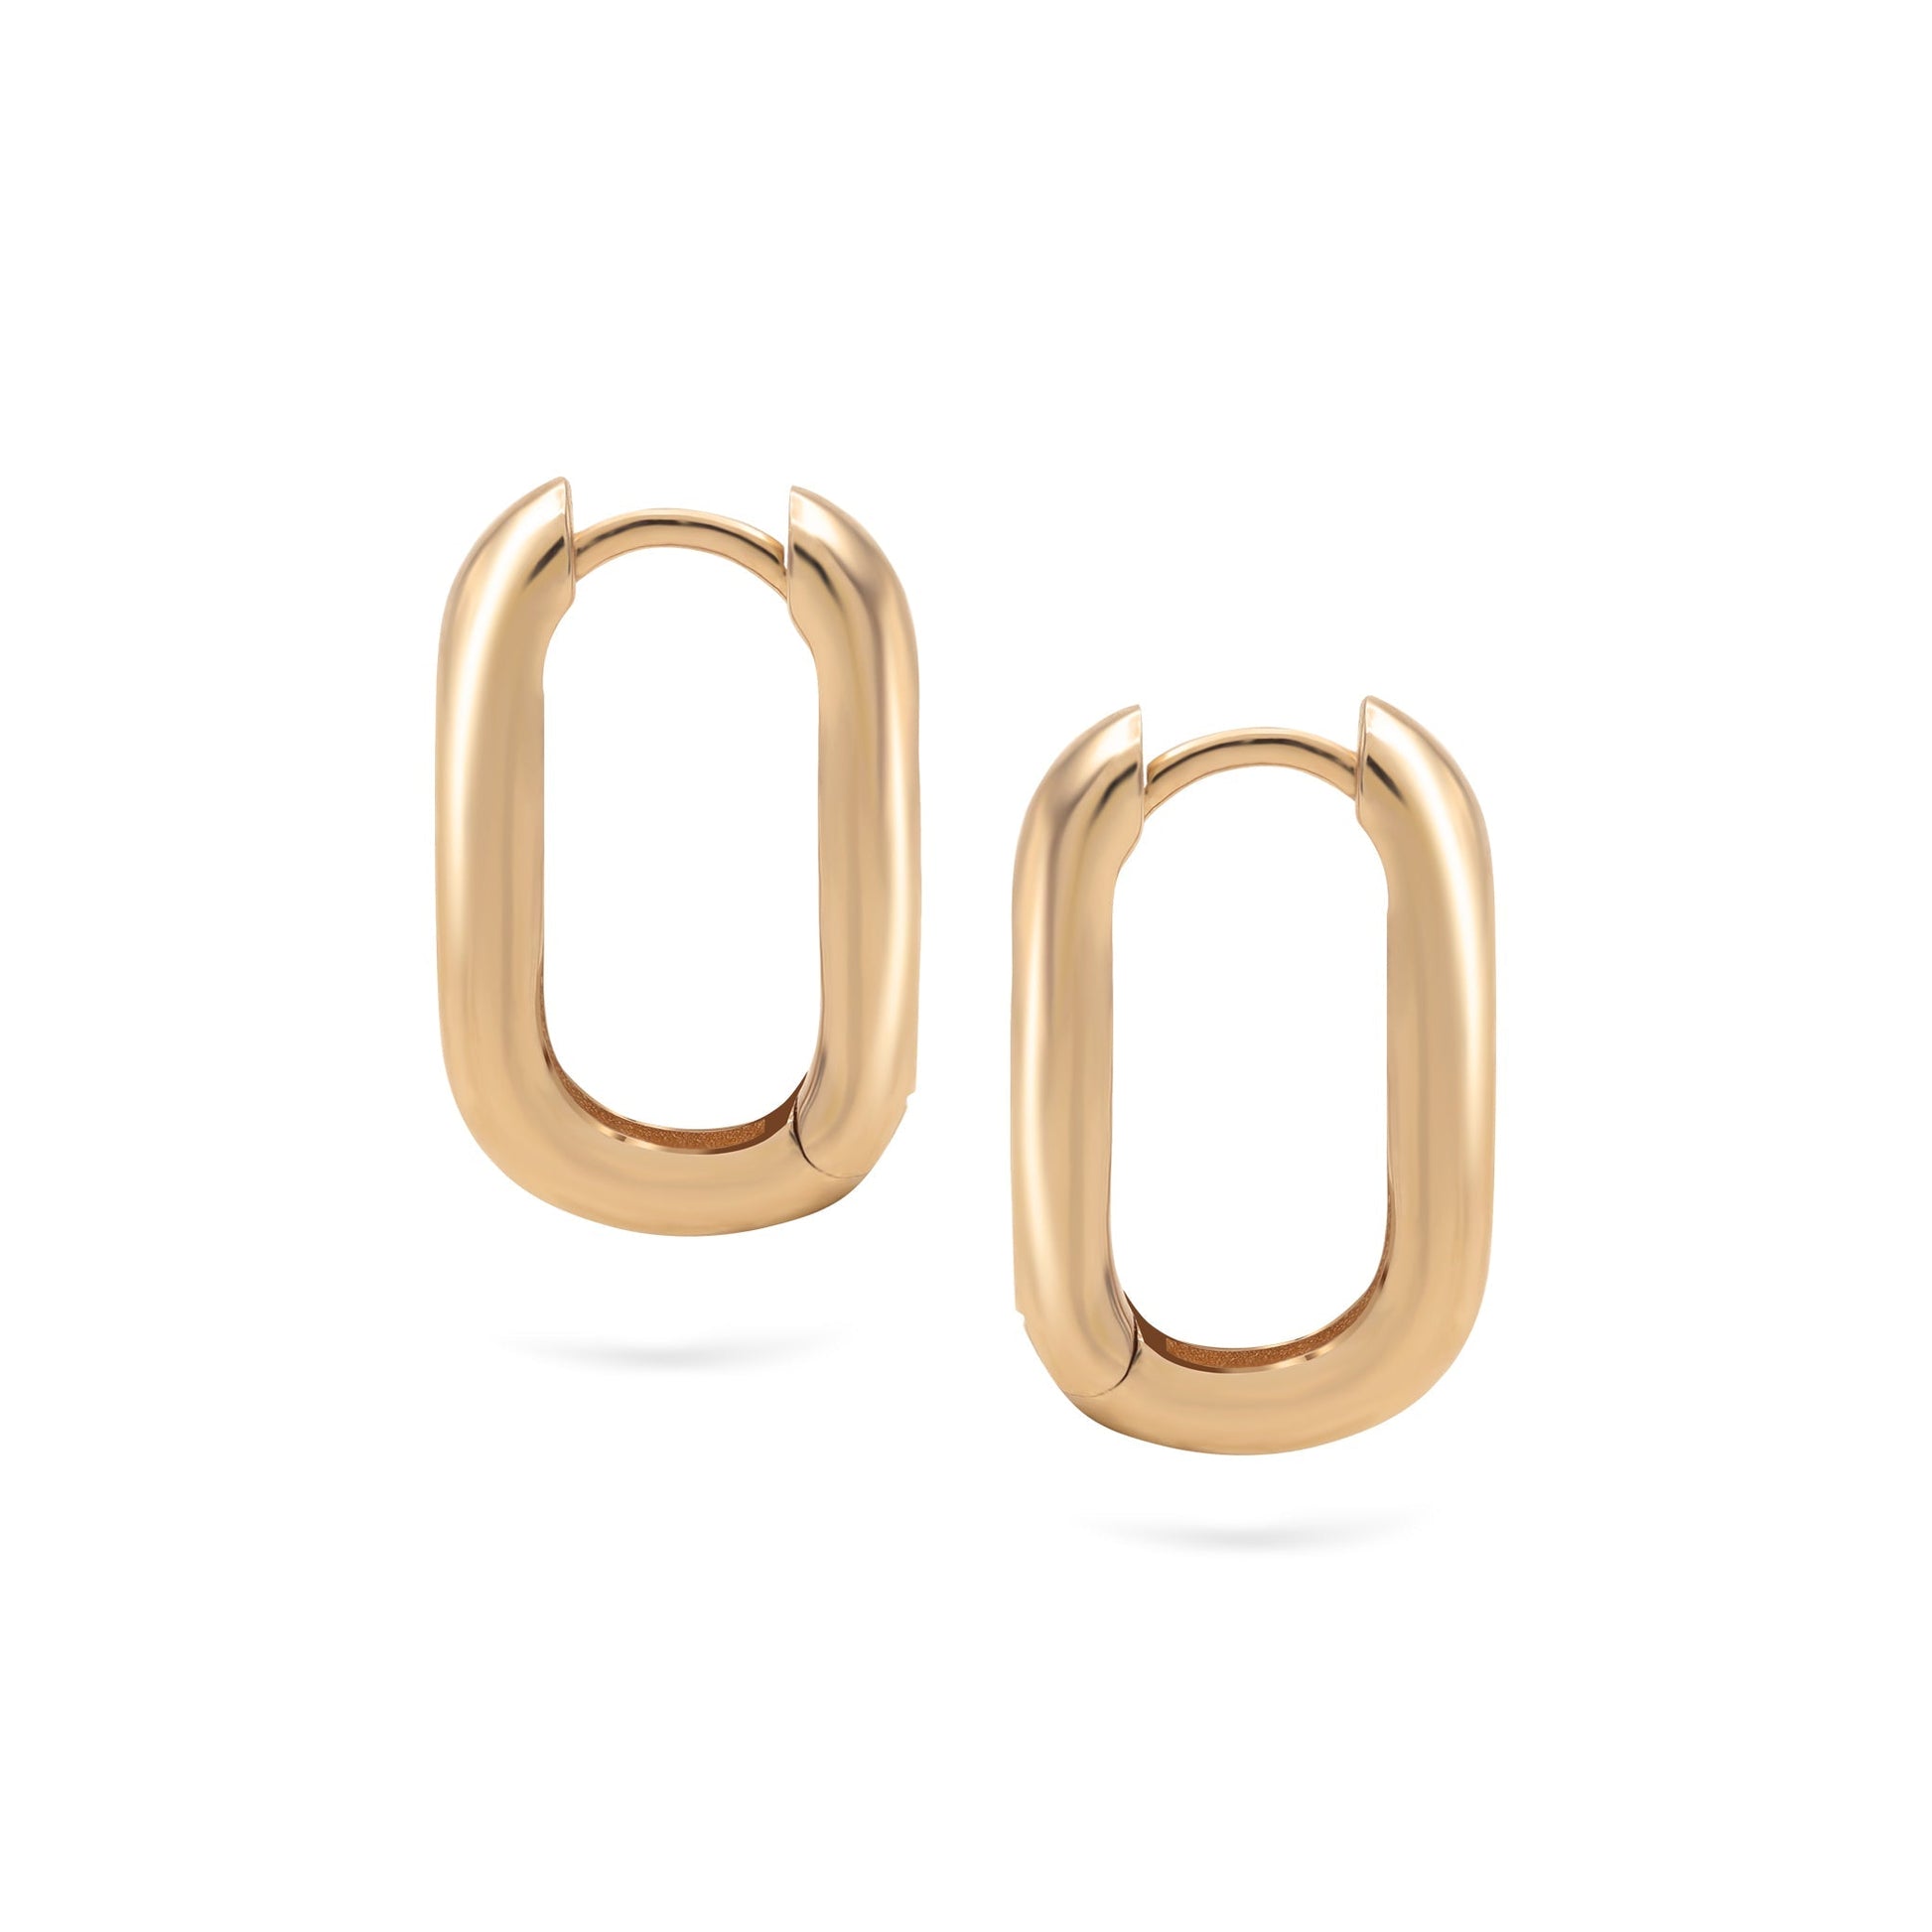 Jewelry Curved Goldens Hoops | Large Gold Earrings | 14K - White / Pair - earrings Zengoda Shop online from